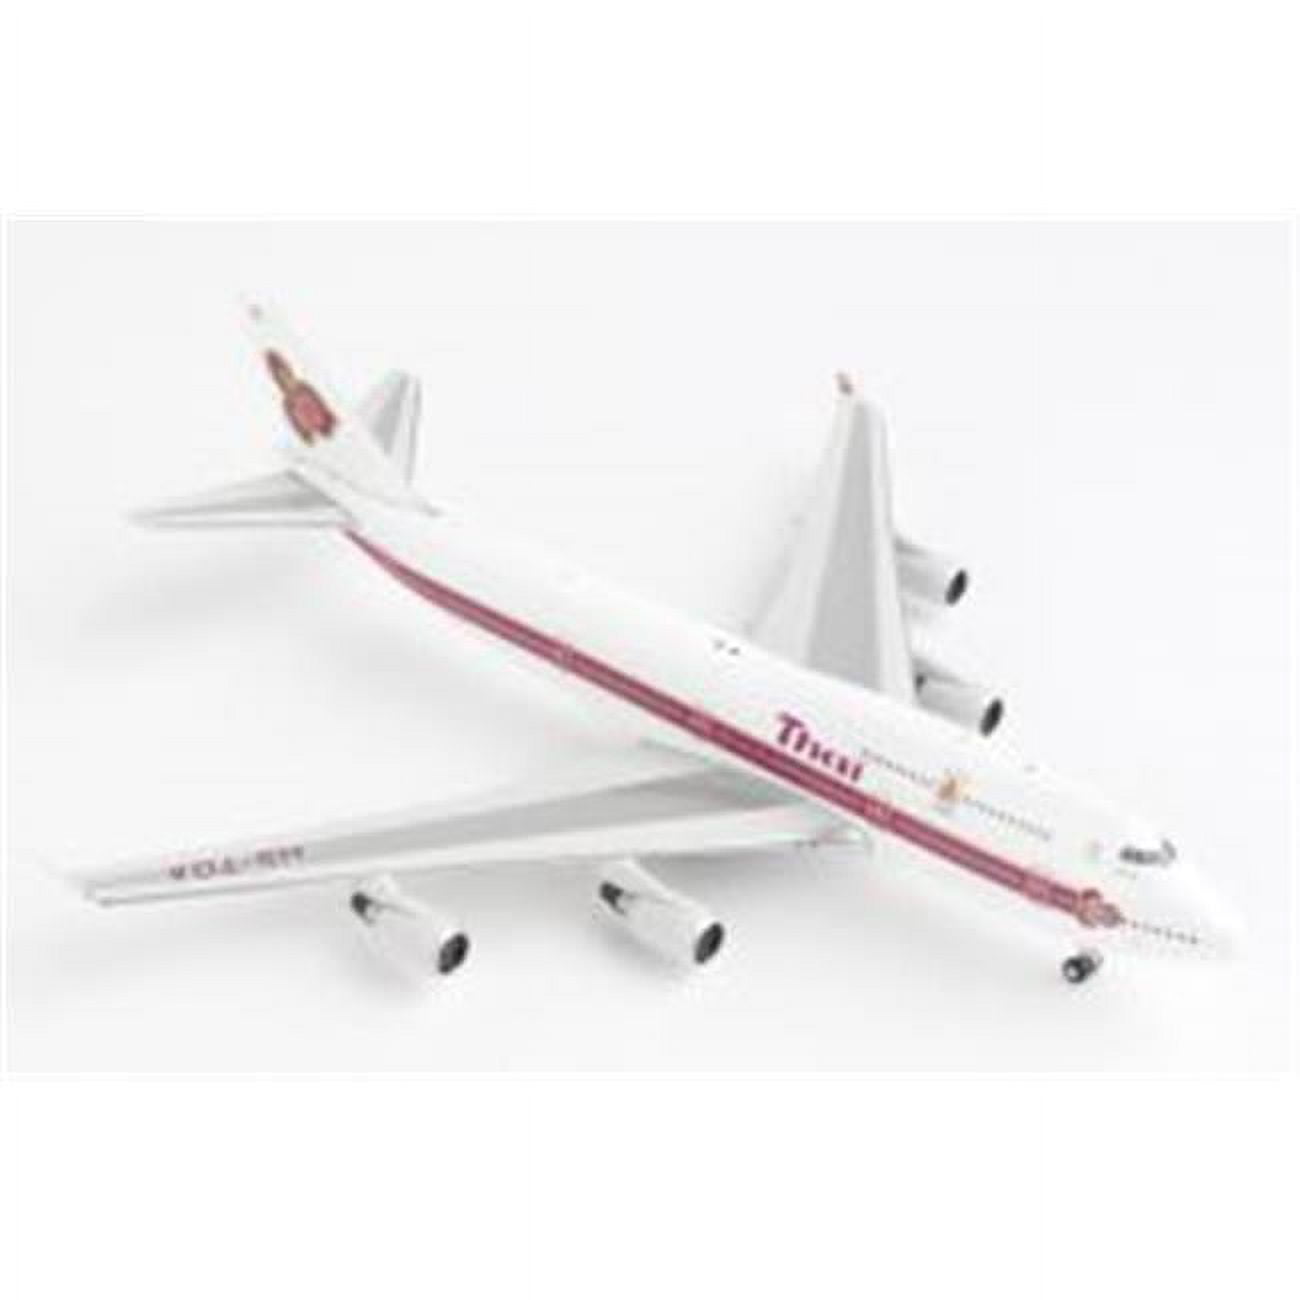 Picture of Phoenix PH2092 747-400 1-400 Scale Old Livery W-Kings Logo HS-TGA Thai Model Airplane